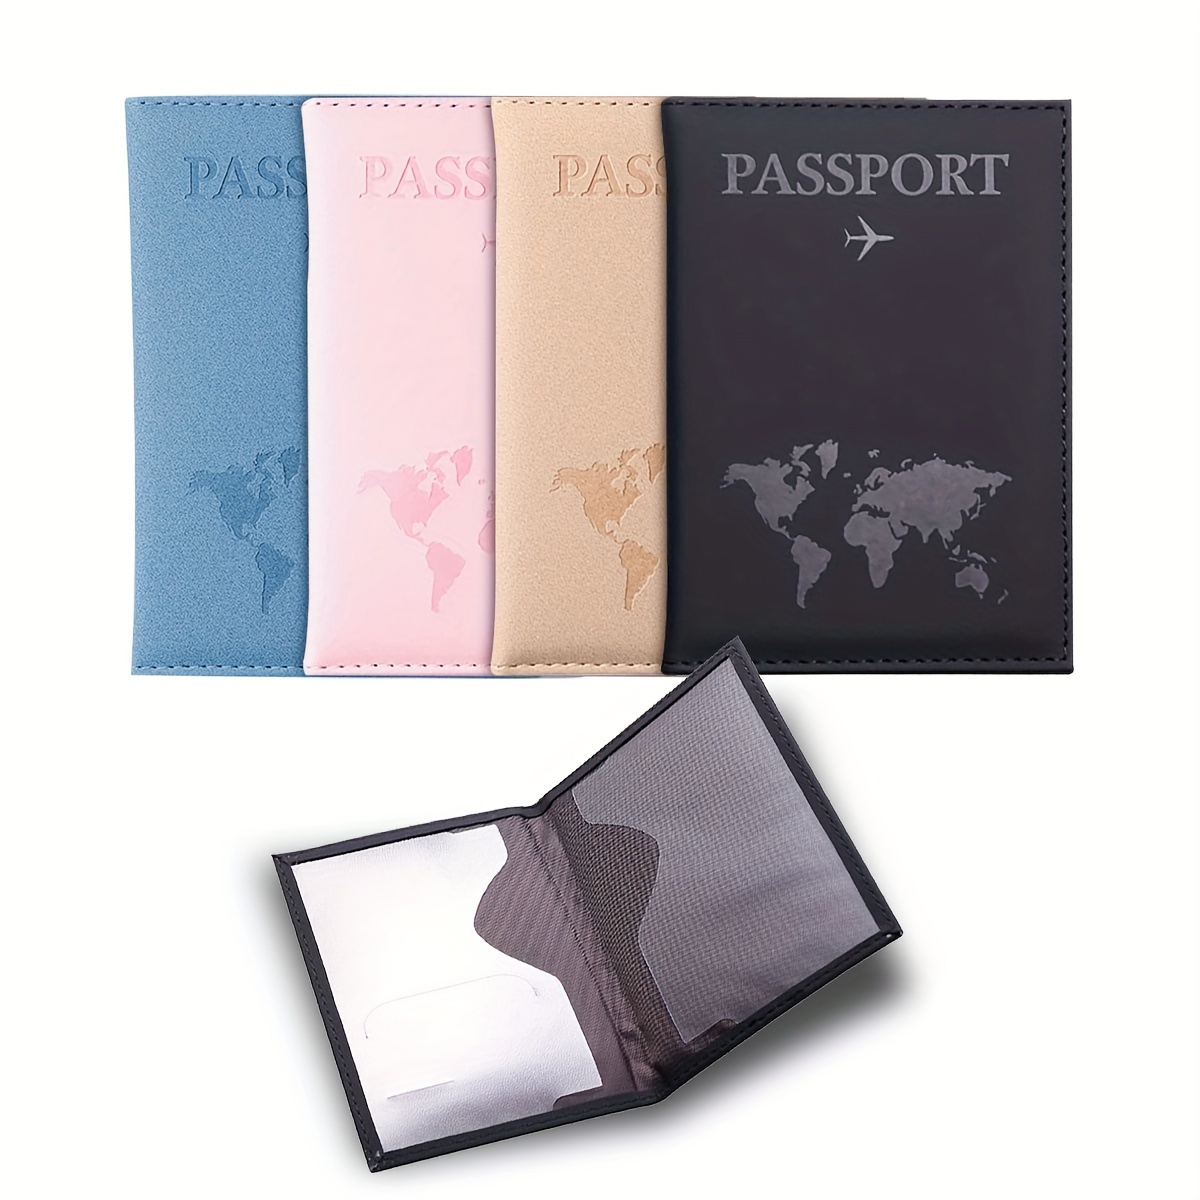 Passport Cover Protector Leather Id Case Card Holder Travel Wallet  Accessories 2pcs